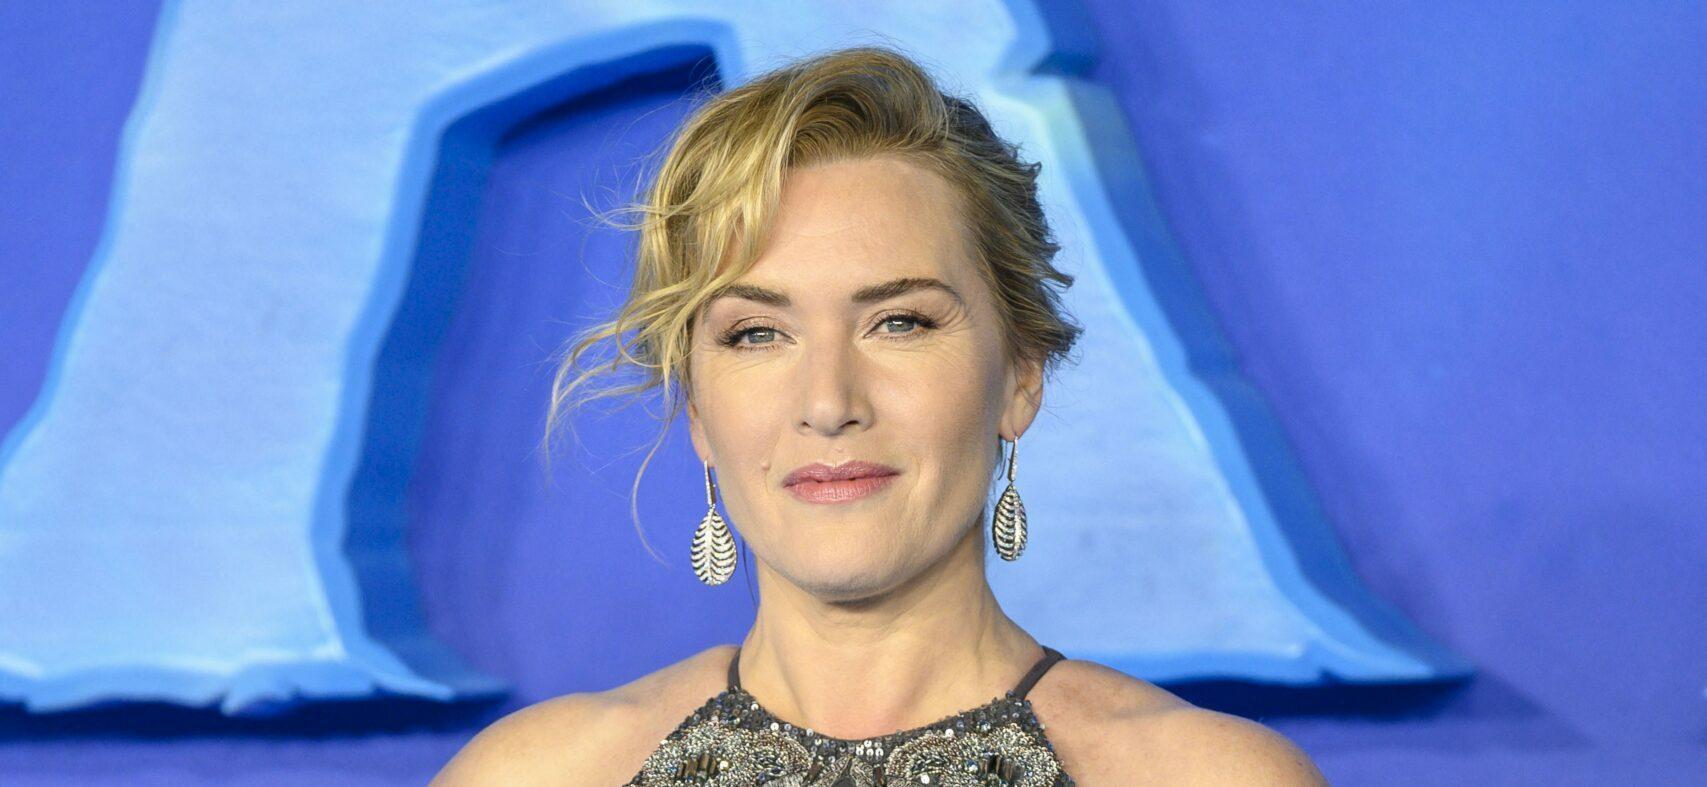 Kate Winslet Wins Over Young Journalist With Her Unwavering Kindness!